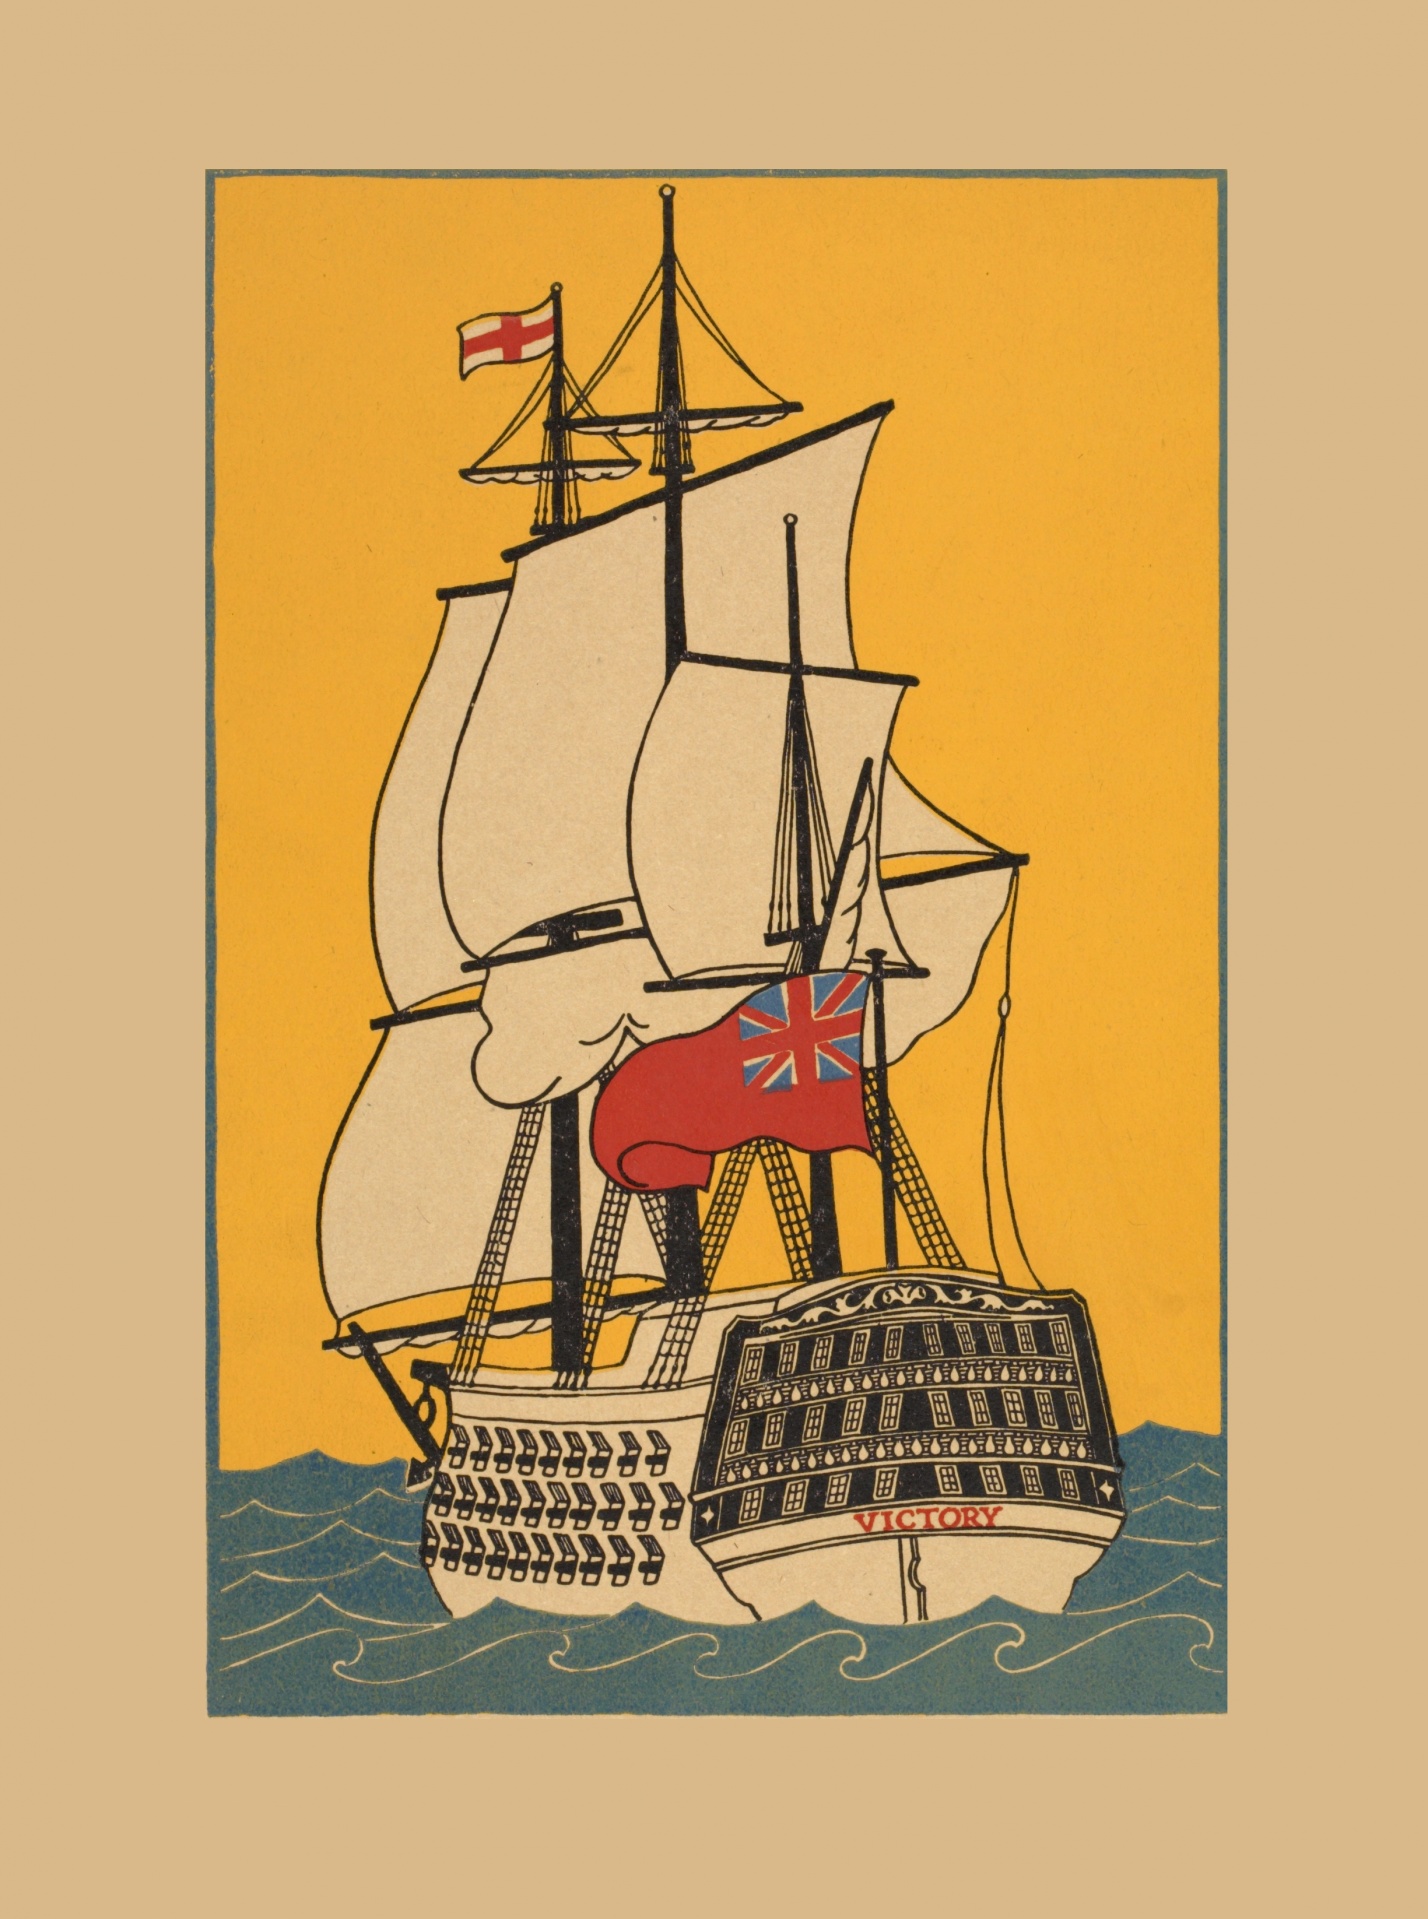 Vintage drawing of ship the Victory print, poster